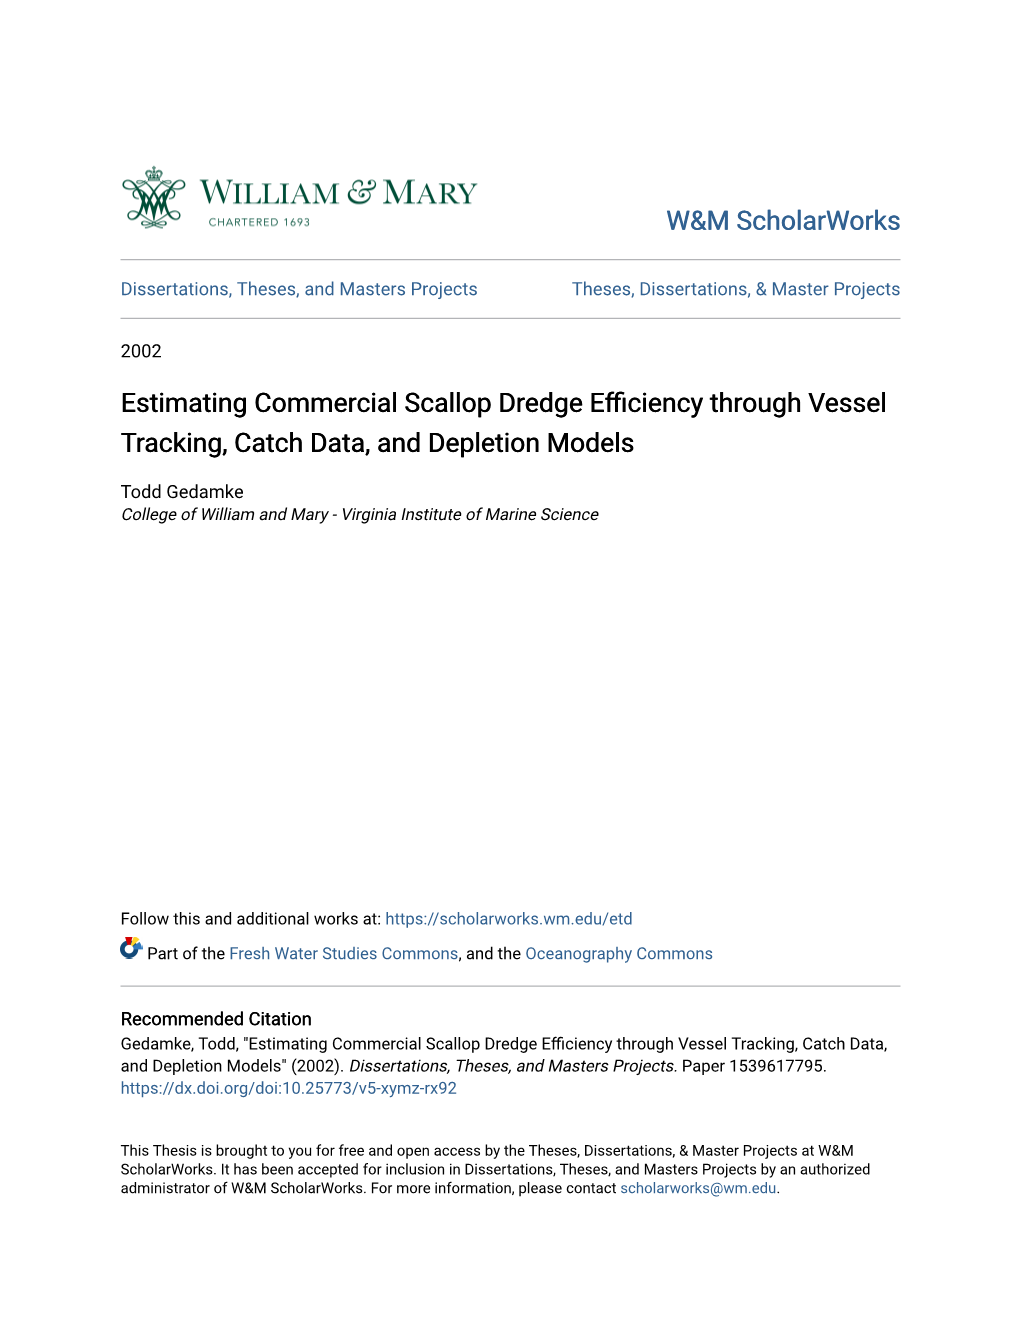 Estimating Commercial Scallop Dredge Efficiency Through Vessel Tracking, Catch Data, and Depletion Models